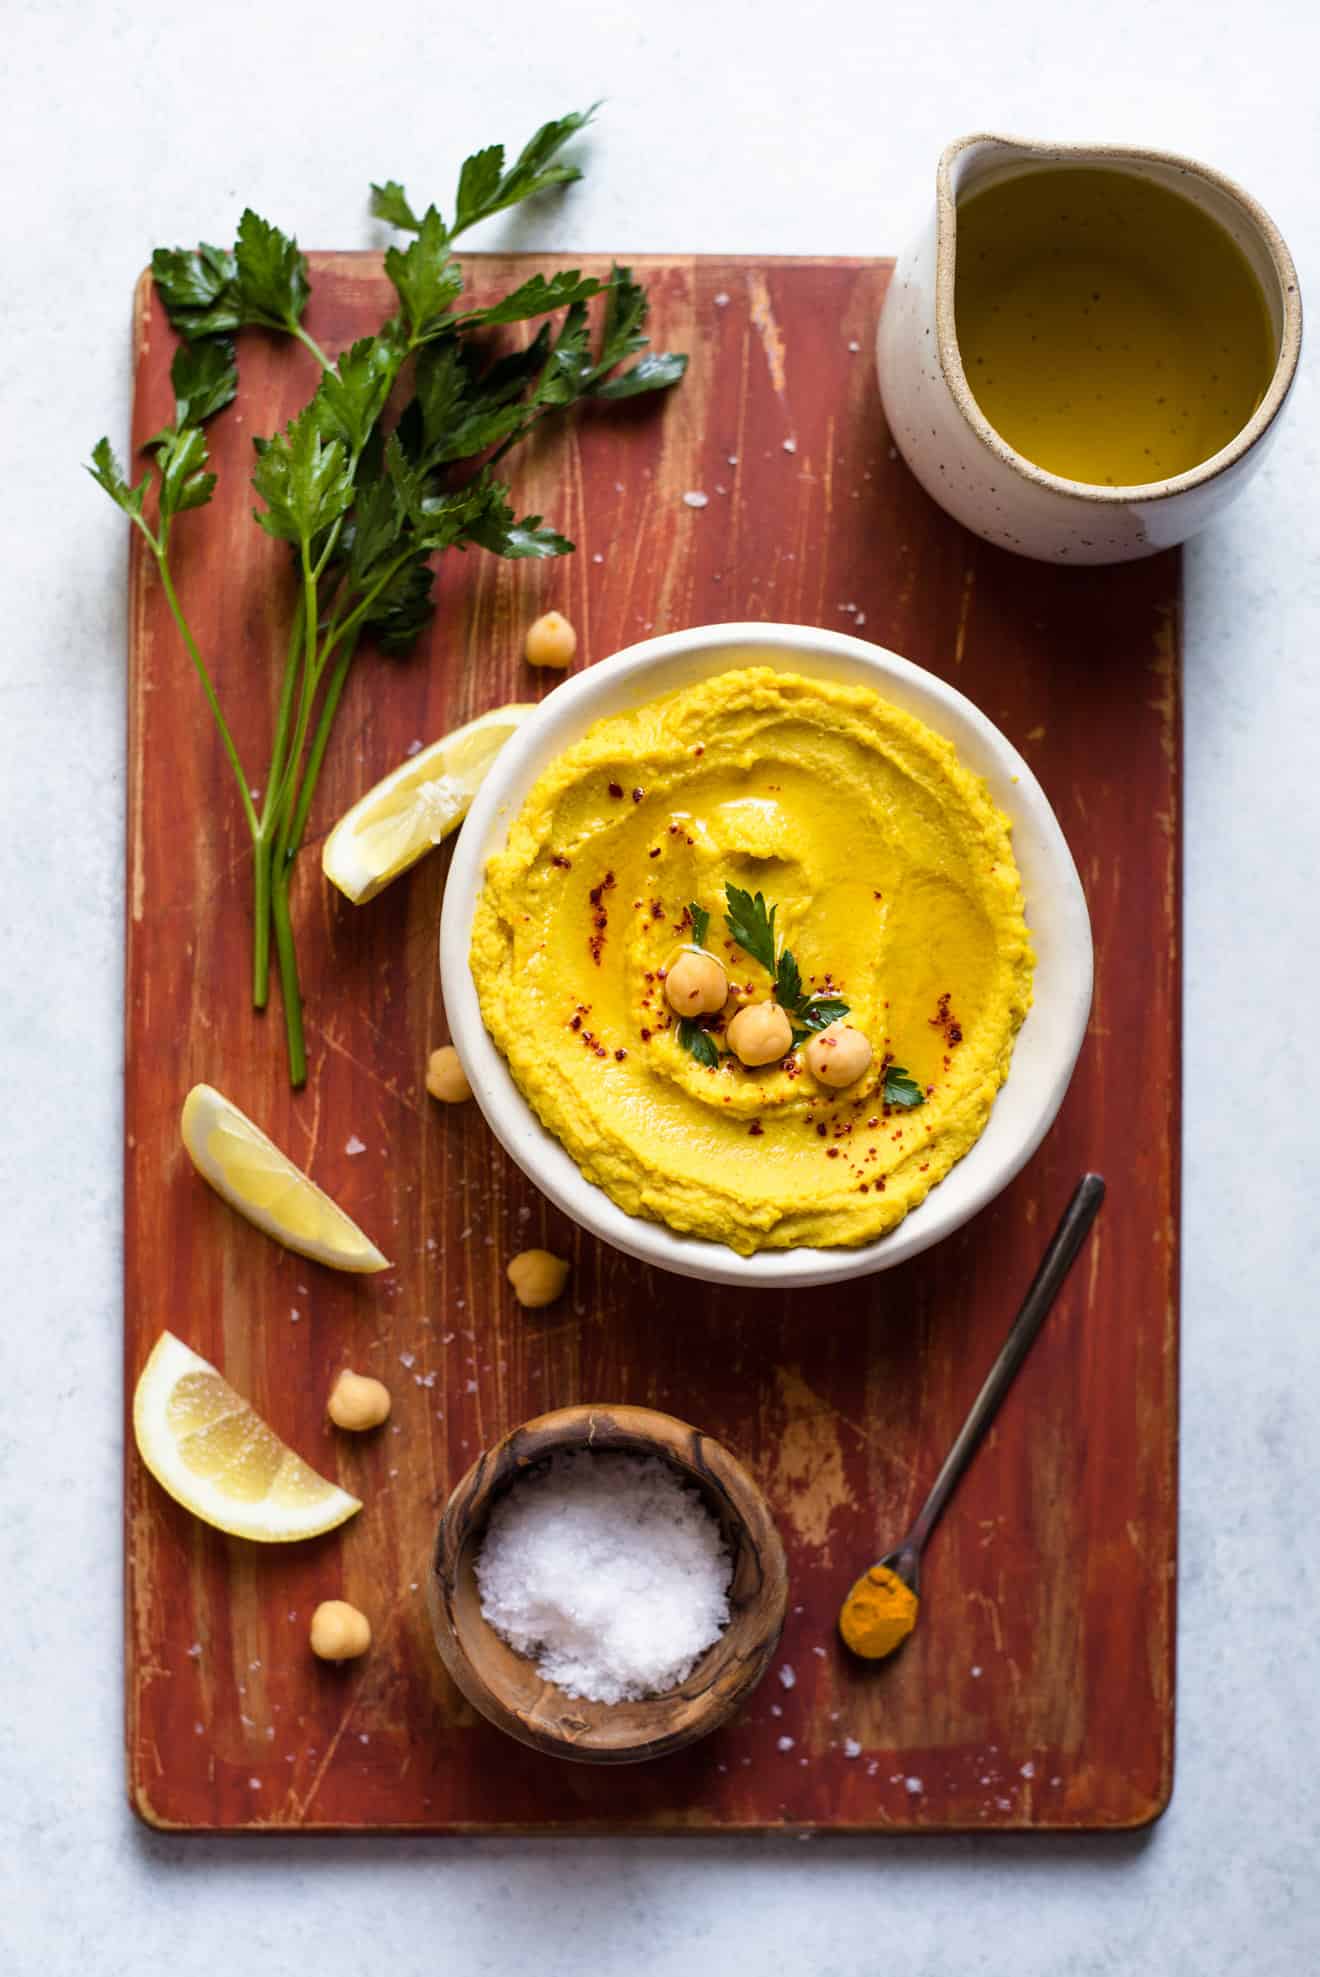 GOLDEN Turmeric Hummus - an easy and healthy vegan hummus that is great as a snack! Ready in under 15 minutes!